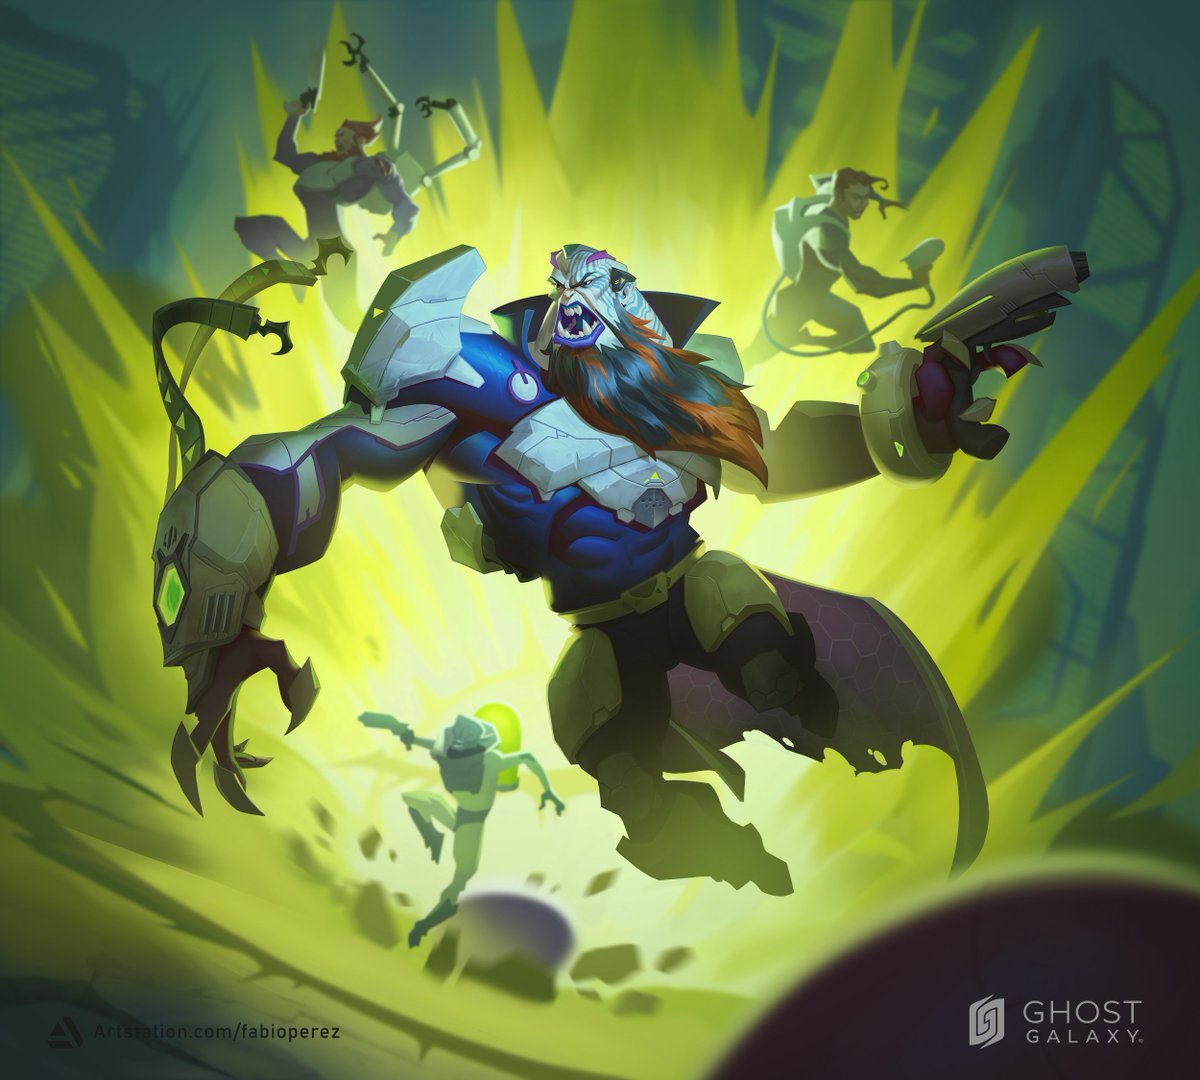 Keyforge card done for Ghost Galaxy a year ago that I had tons of fun doing it! I learned a lot trying to push my rendering skills with the help of Luke Olson and Felipe Martini, thanks guys!
artstation.com/artwork/lDvZDJ